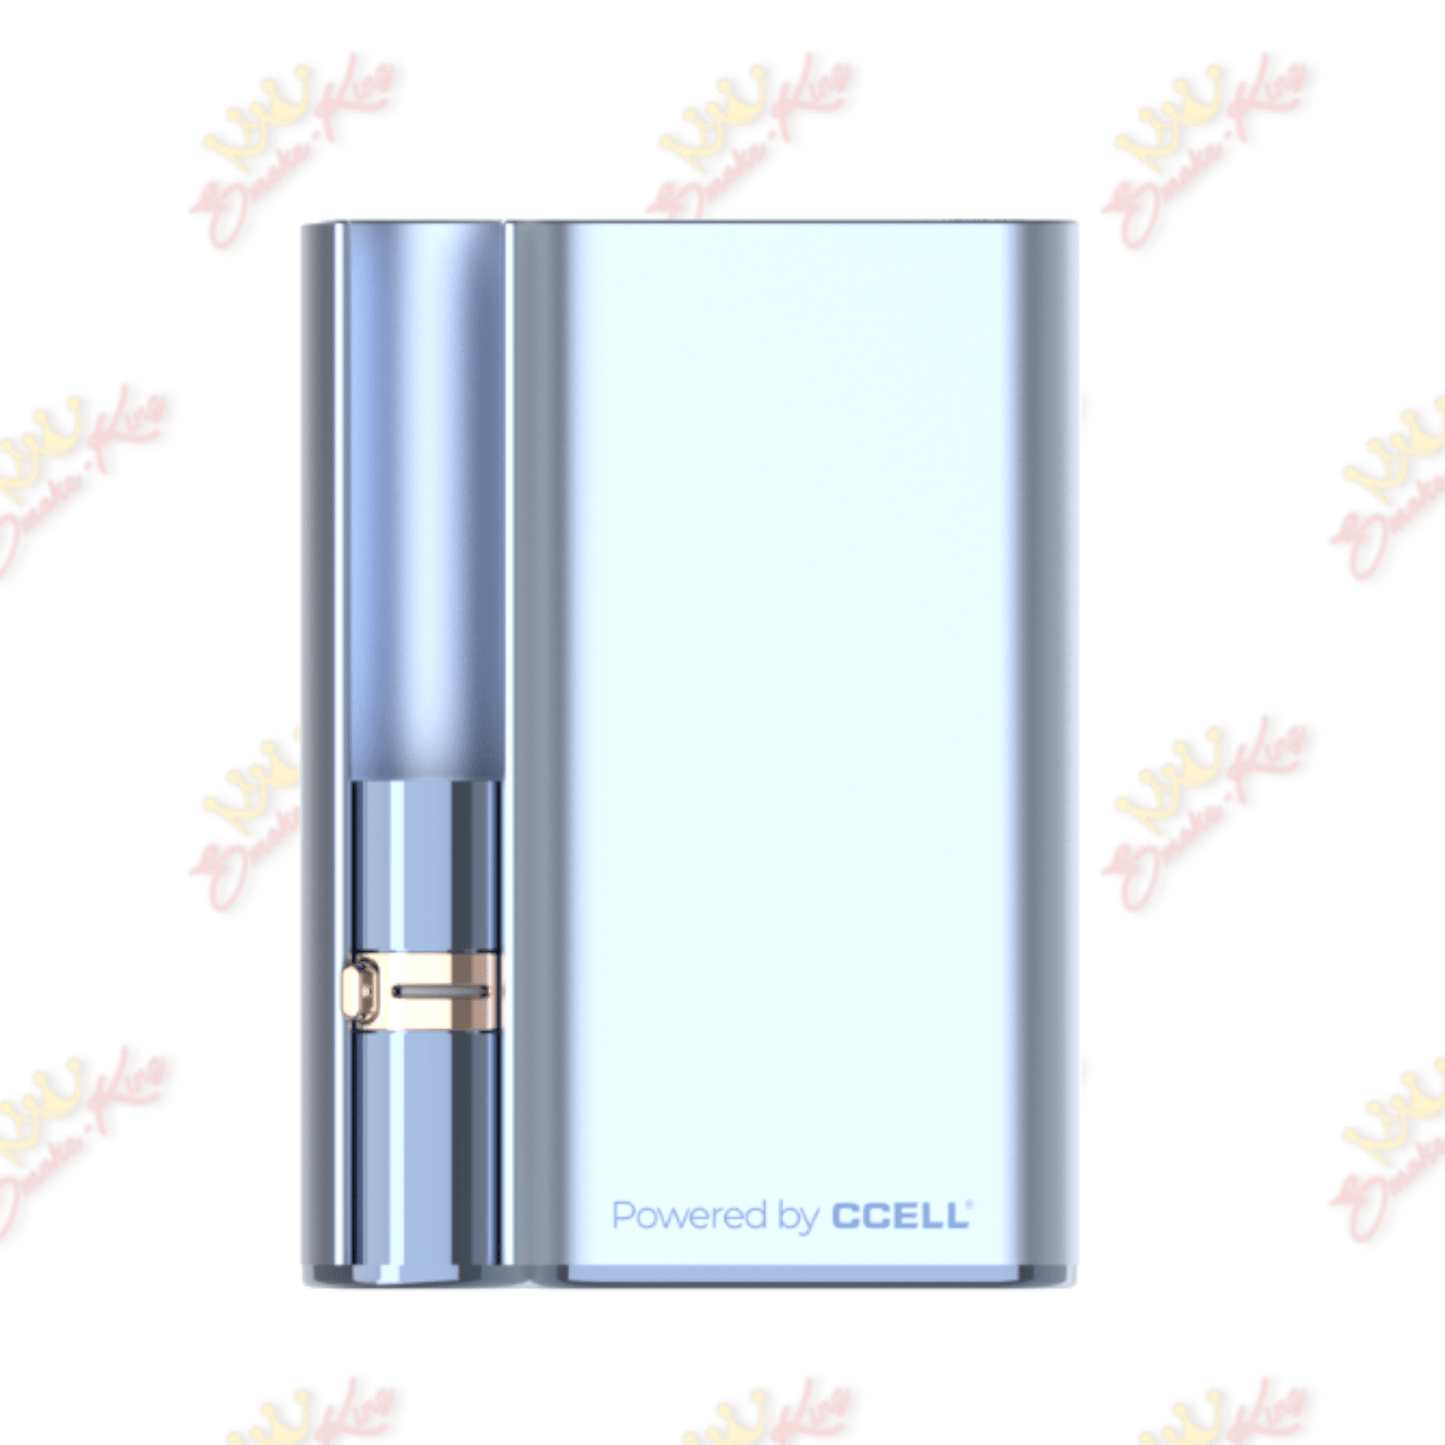 CCELL Blue CCELL Palm Pro Battery CCELL Palm Pro Battery | Cartridge Battery | Smoke-King